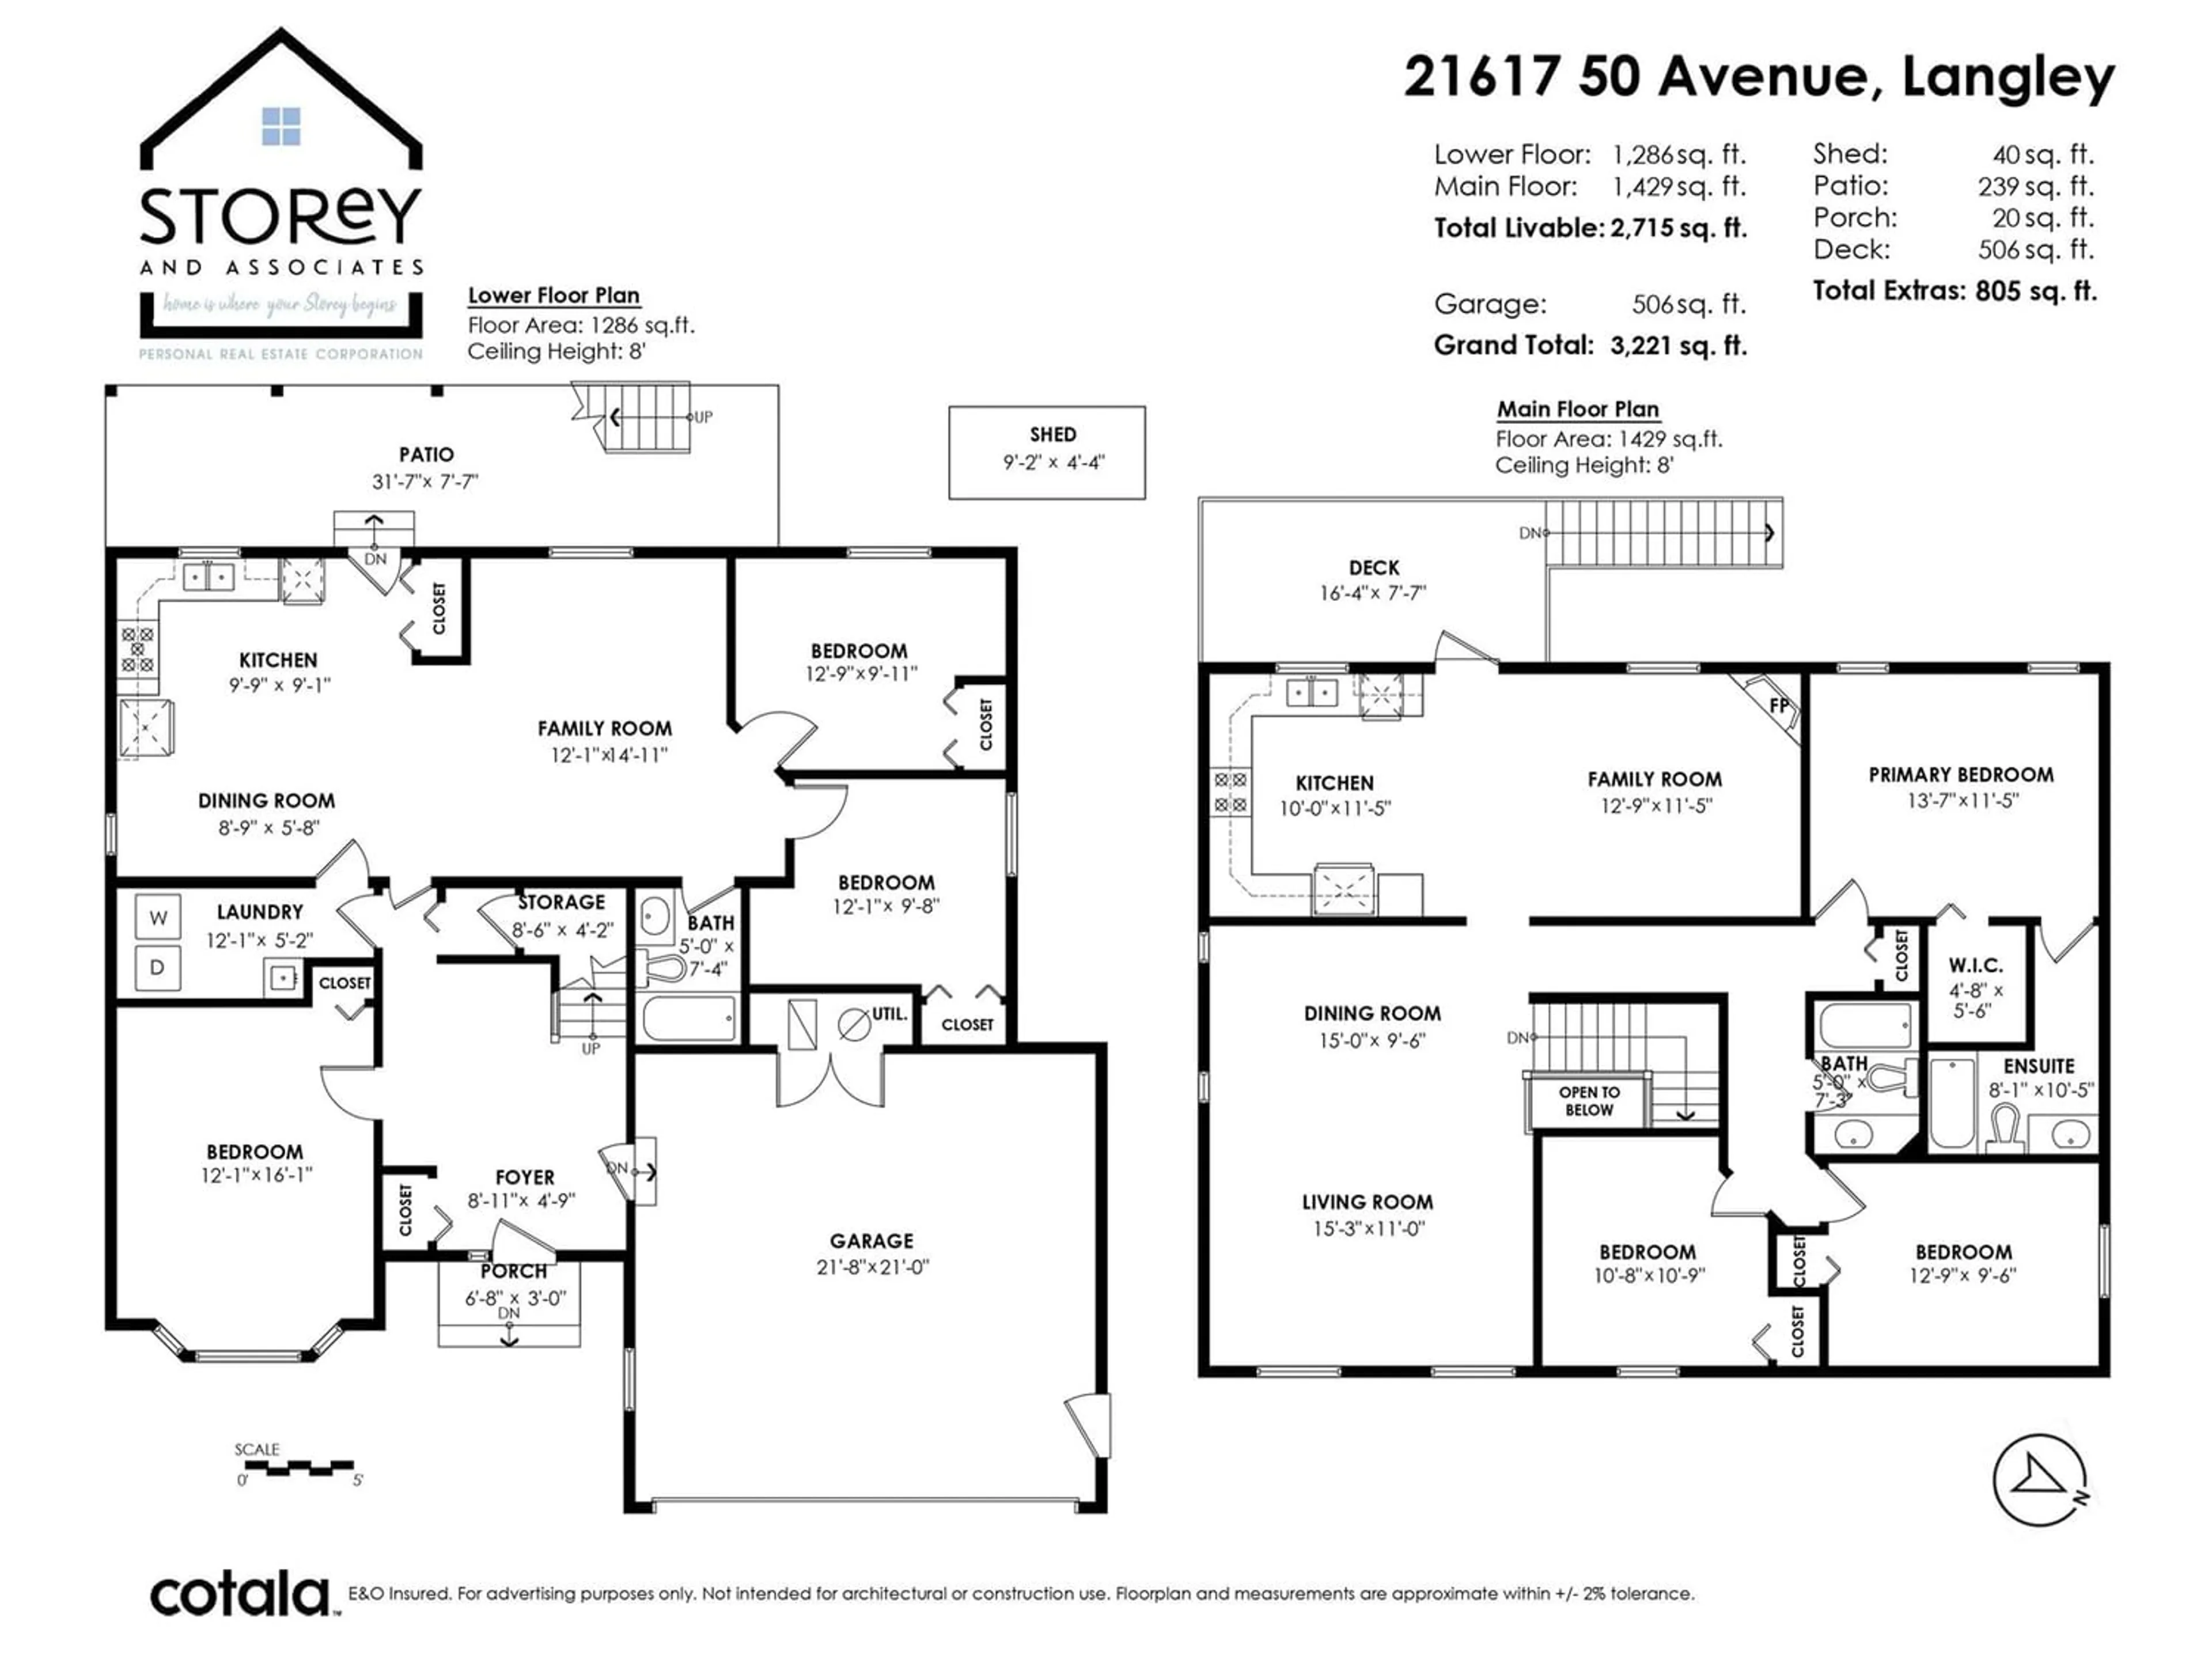 Floor plan for 21617 50 AVENUE, Langley British Columbia V3A3T2